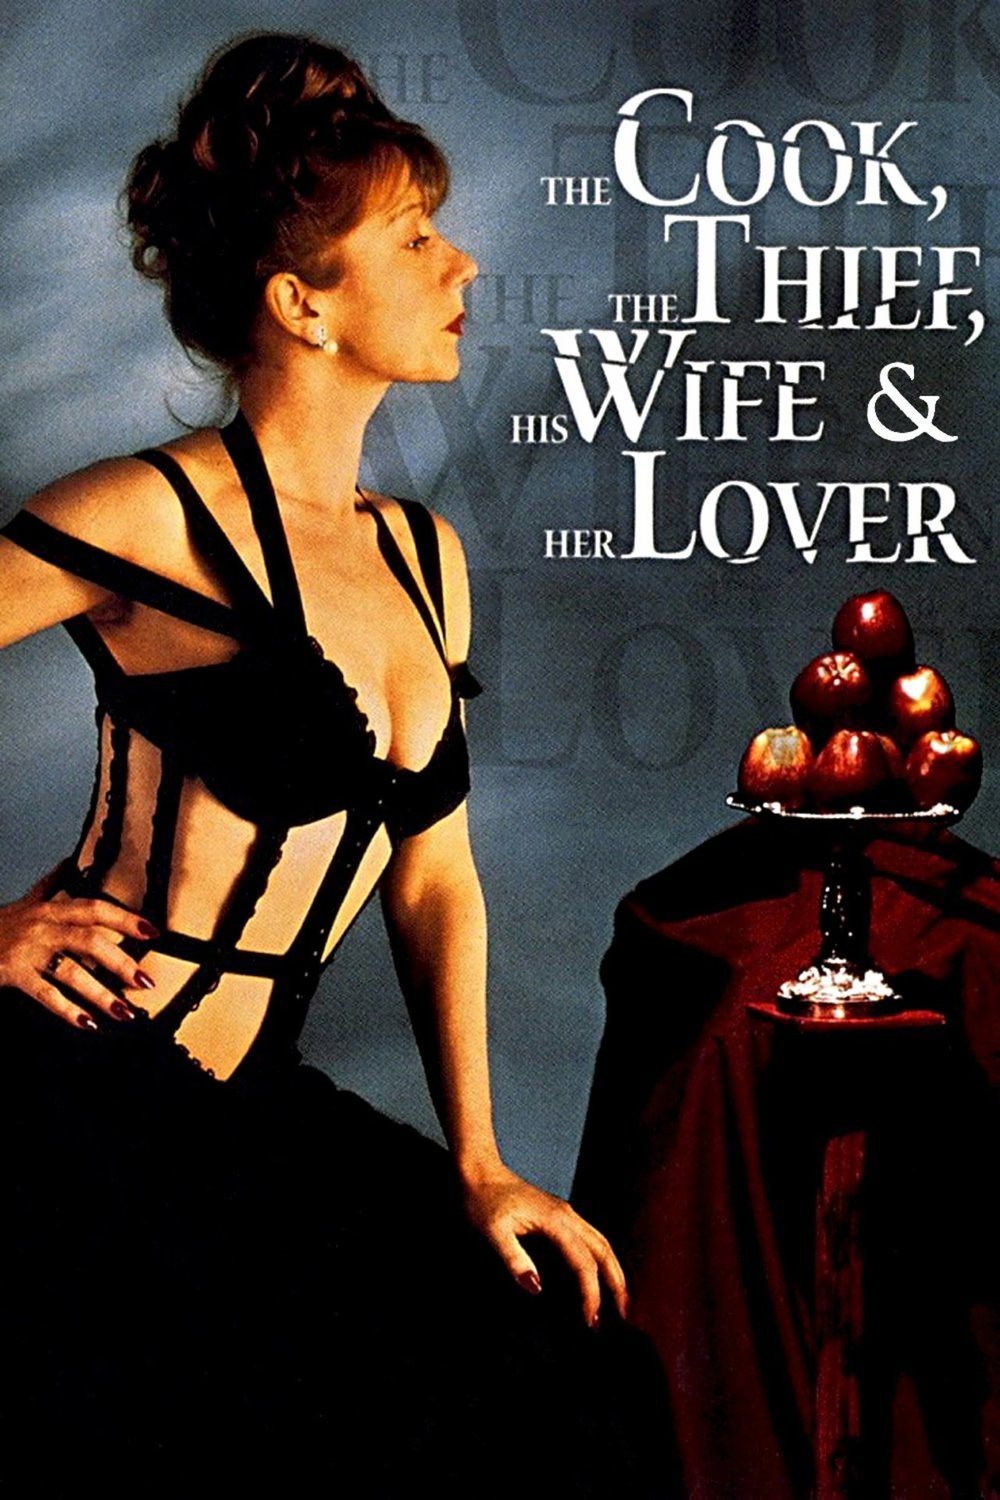 The Cook, the Thief, His Wife & Her Lover | Fandíme filmu